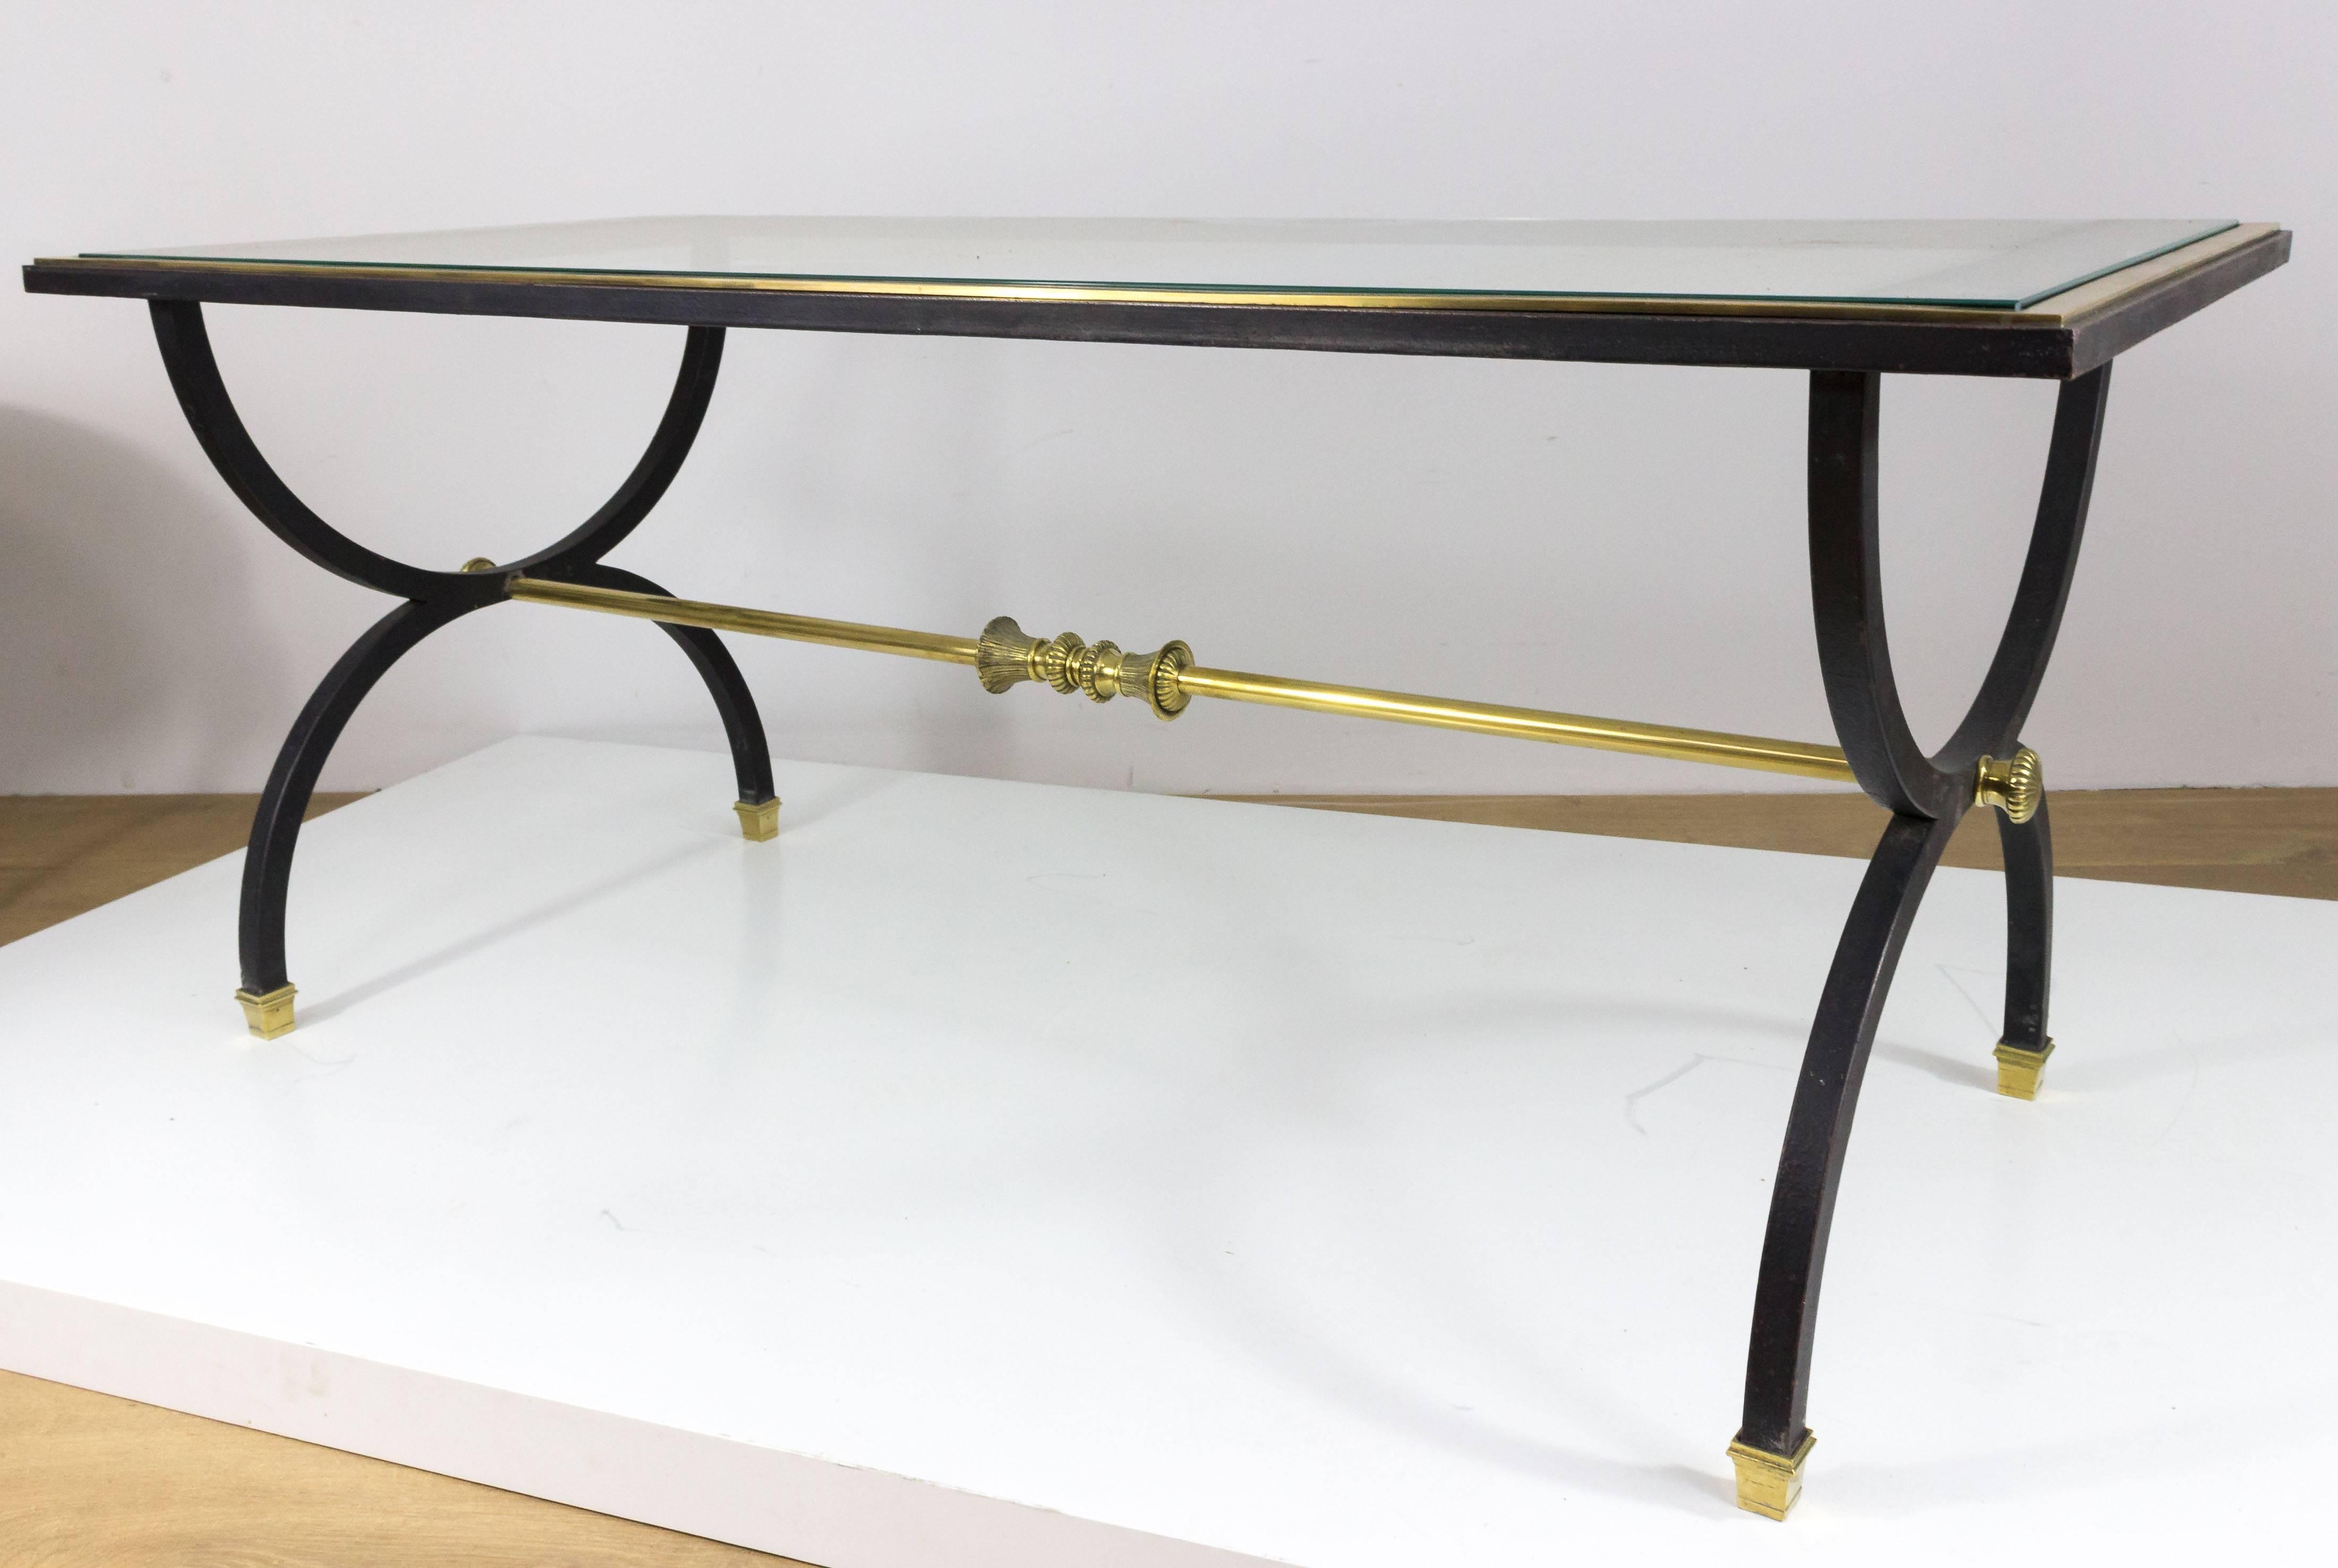 Neoclassical black lacquered steel coffee table with brass and bronze ornaments, 1950s.

This coffee table is currently in France, please allow us 4 to 6 weeks for delivery.